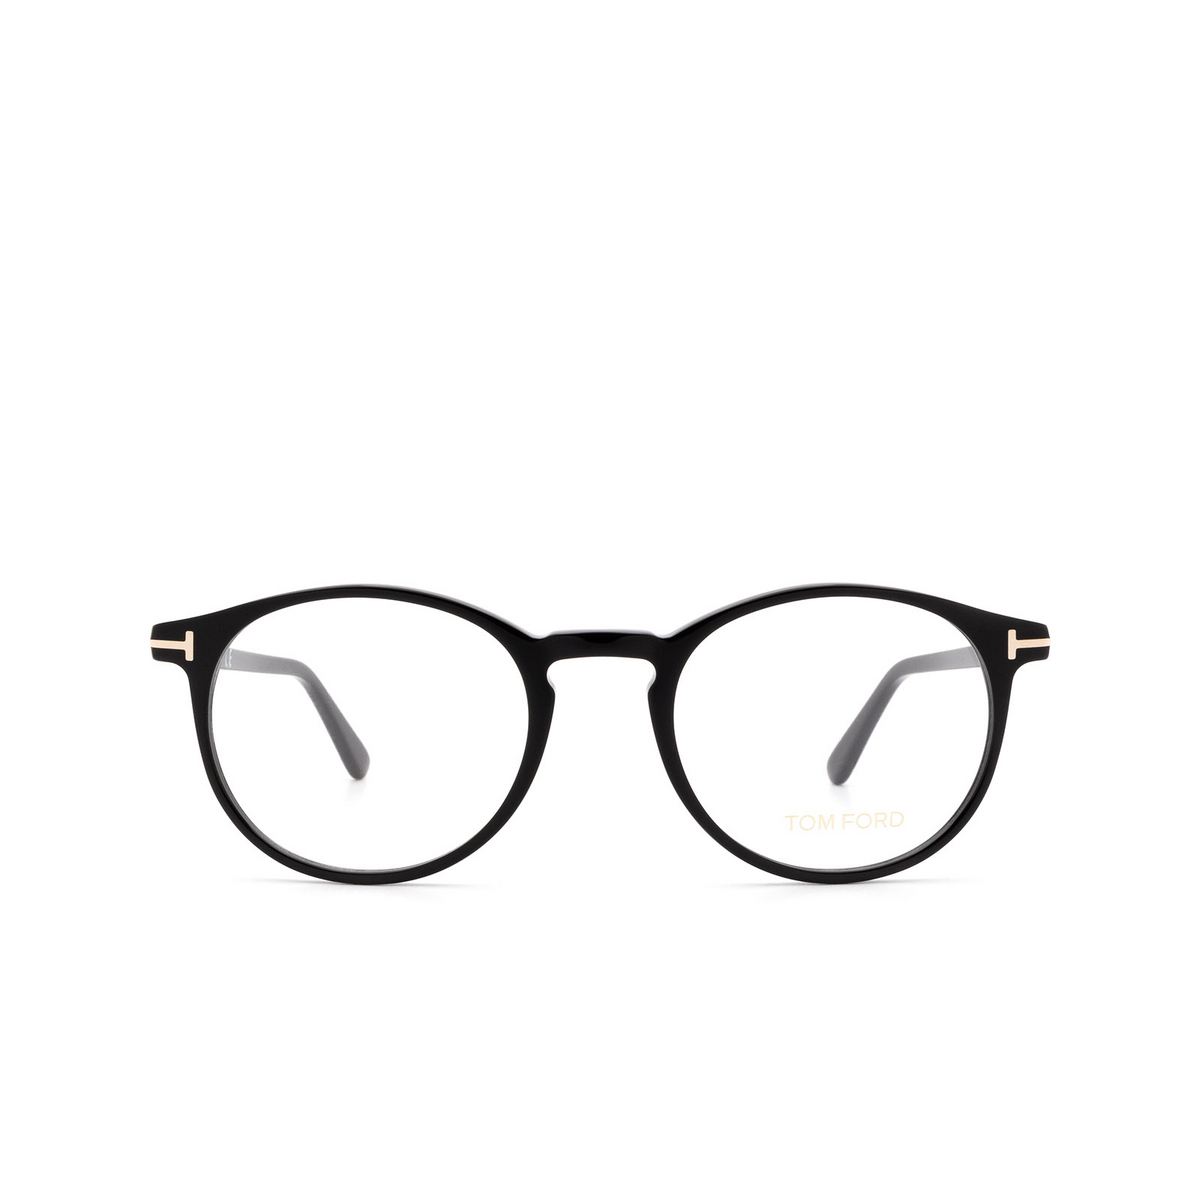 Tom Ford® Round Eyeglasses: FT5294 color Shiny Black 001 - front view.